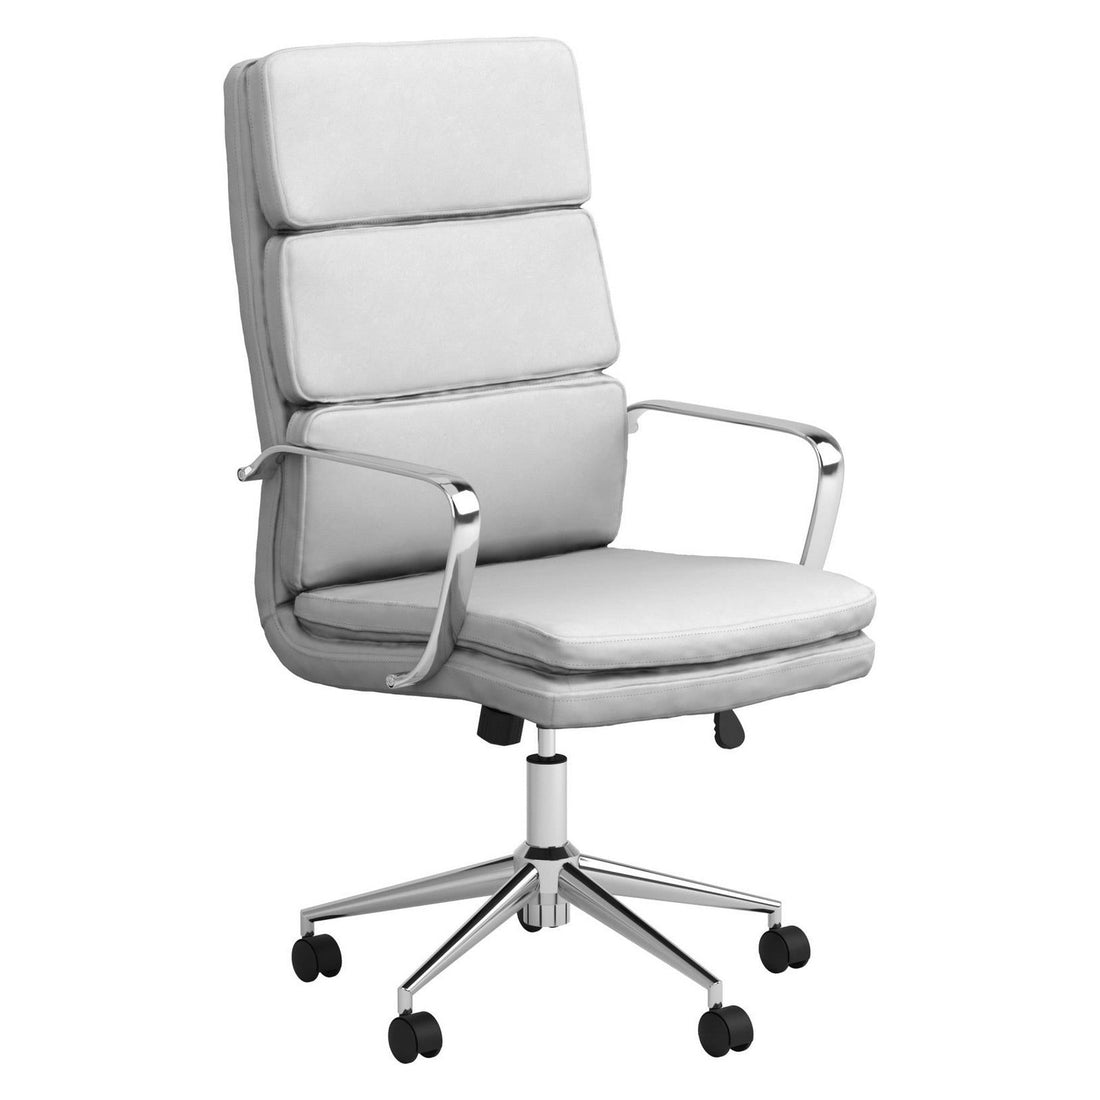 Ximena High Back Upholstered Office Chair White 801746